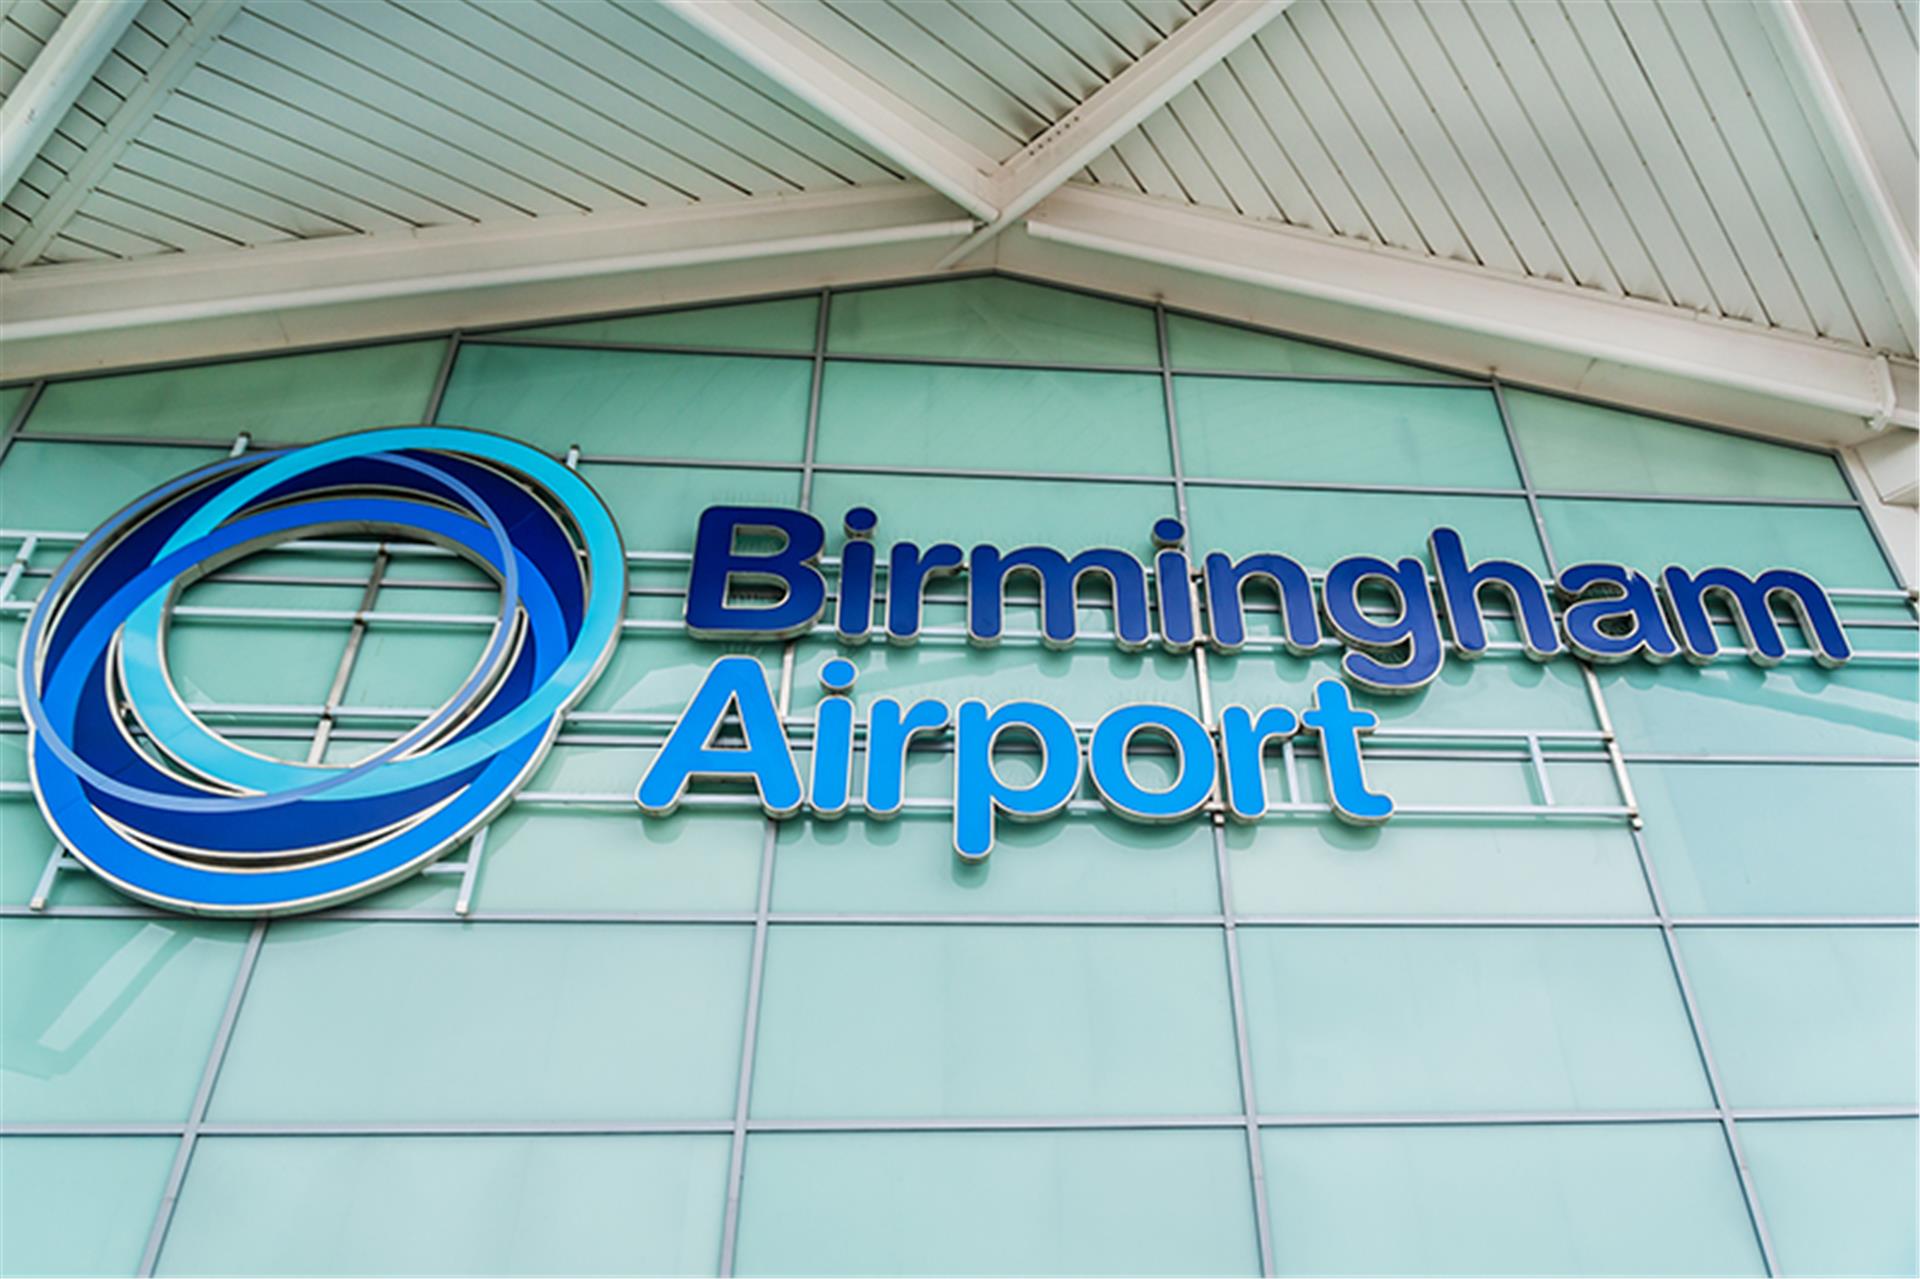 uk-news-2019-ocs-awarded-five-year-contract-at-birmingham-airport